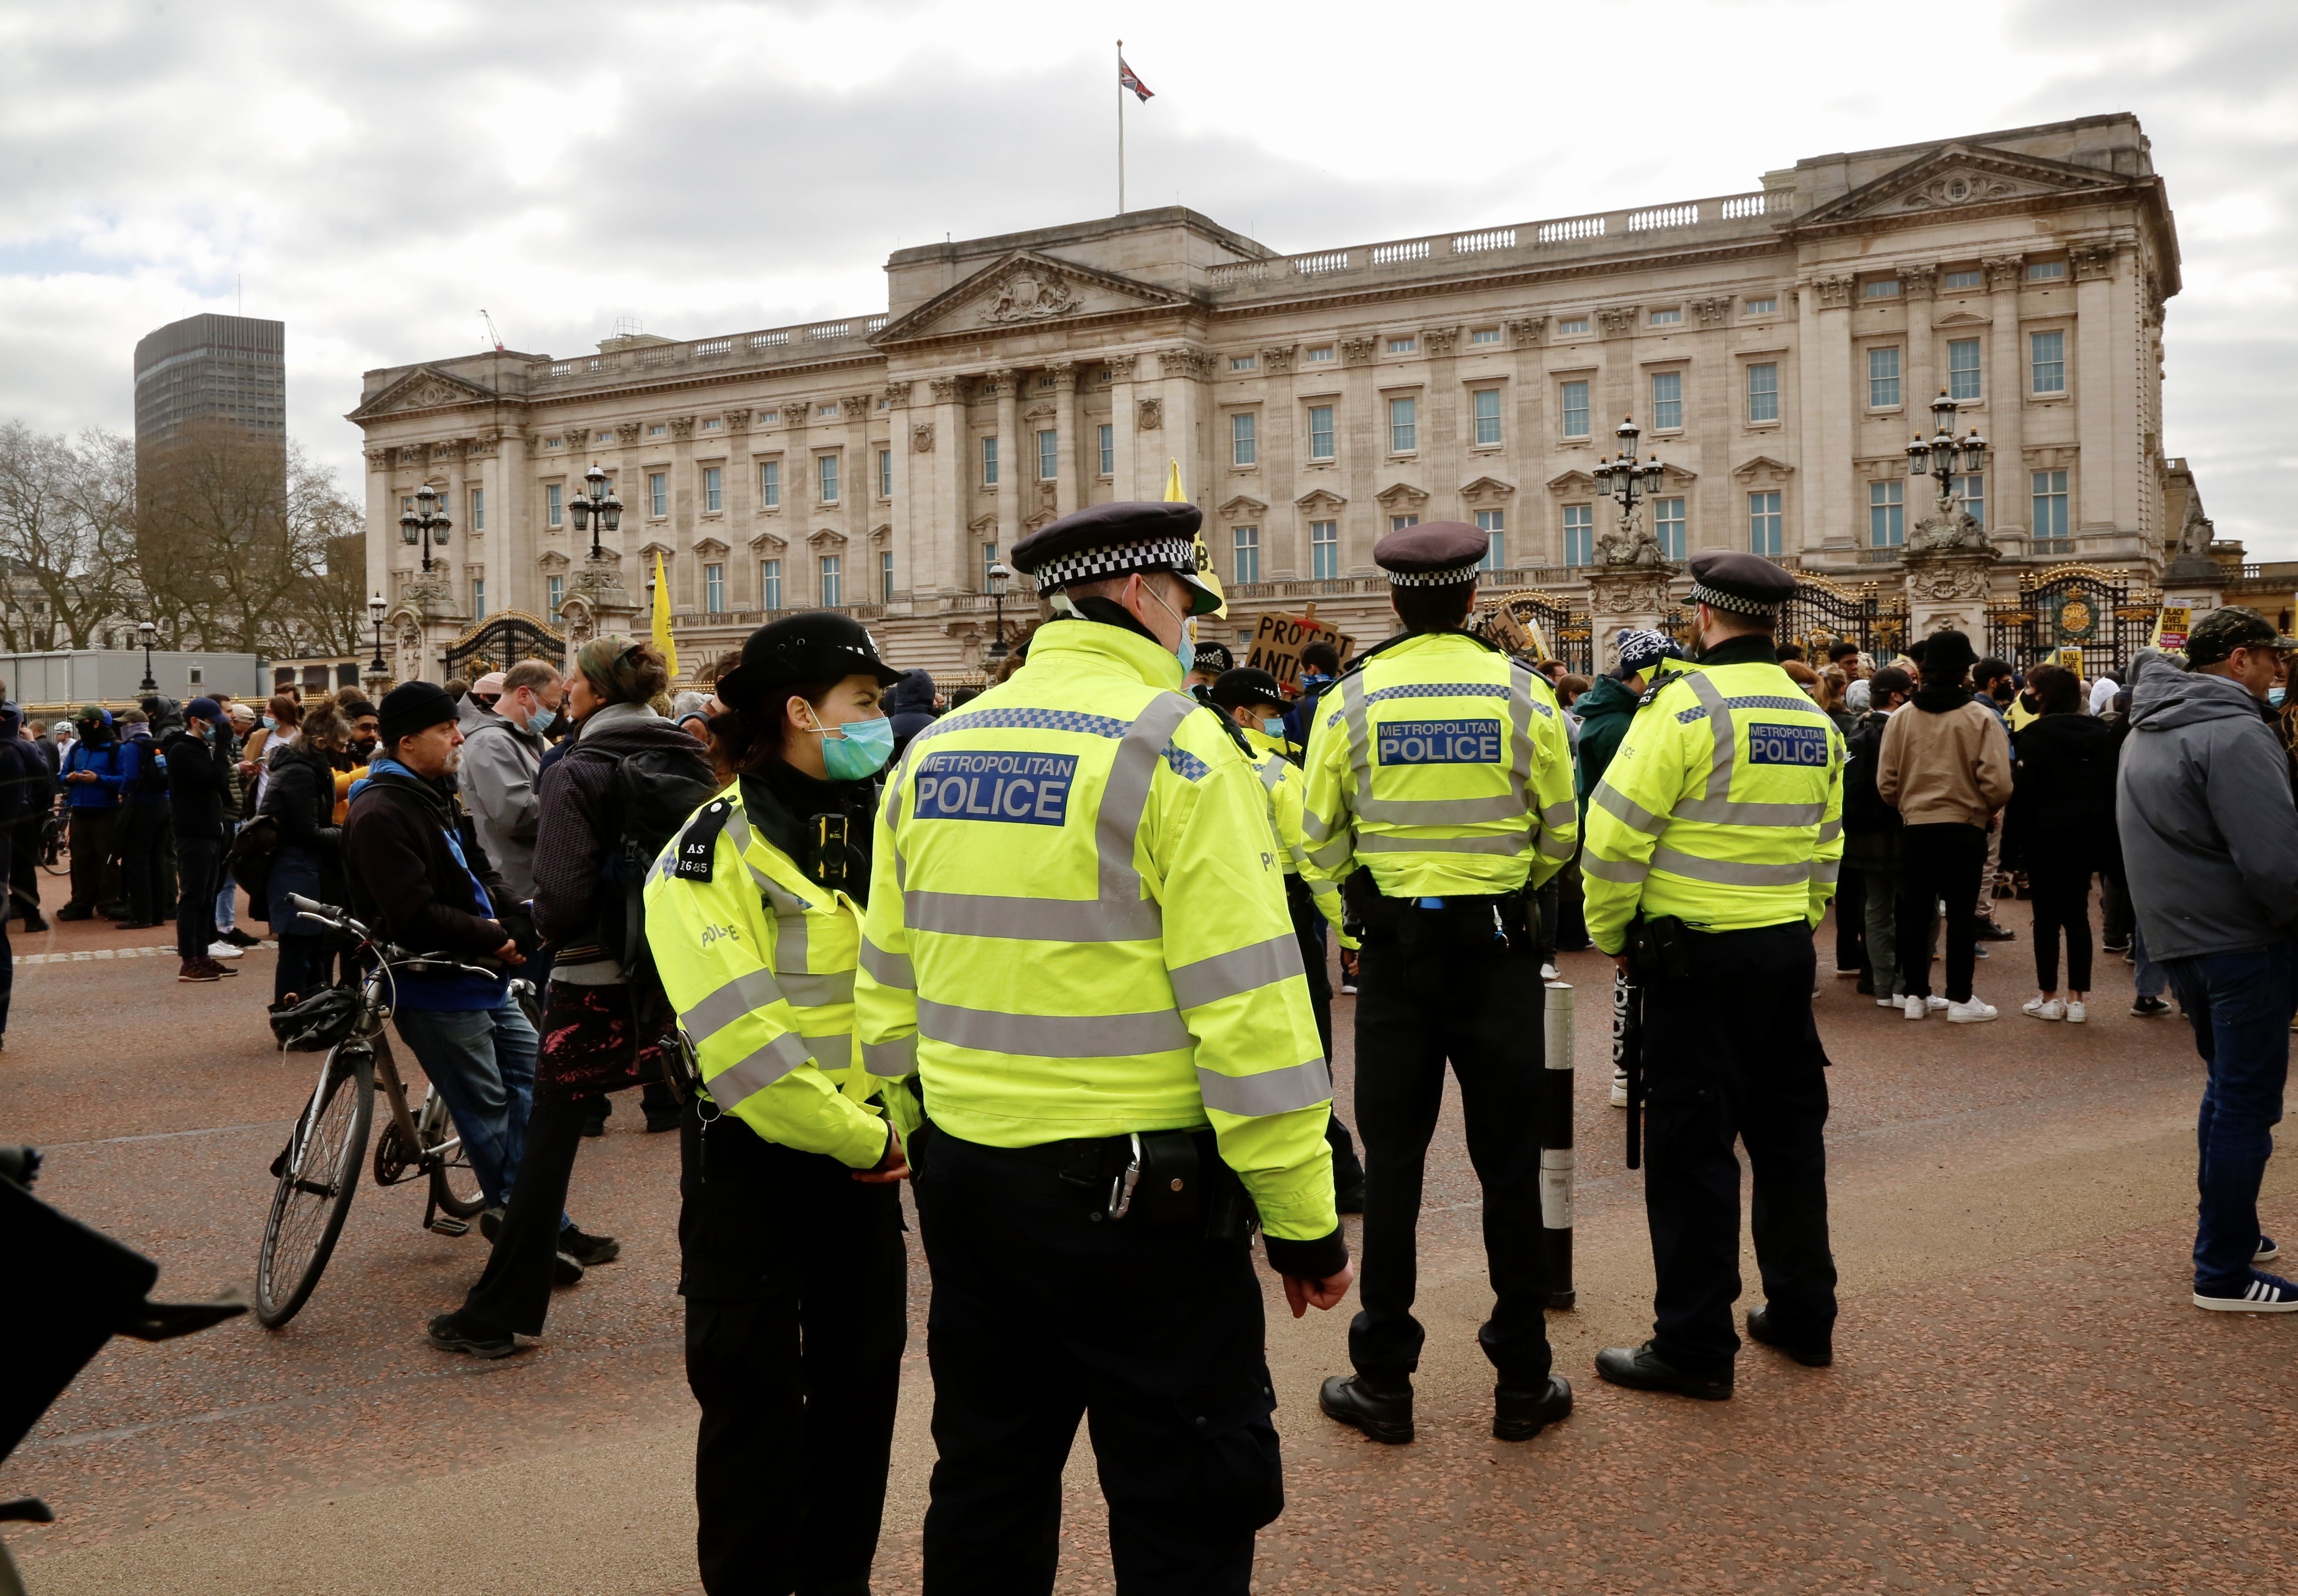 Police monitoring a "kill the bill" protest in London on April 3.